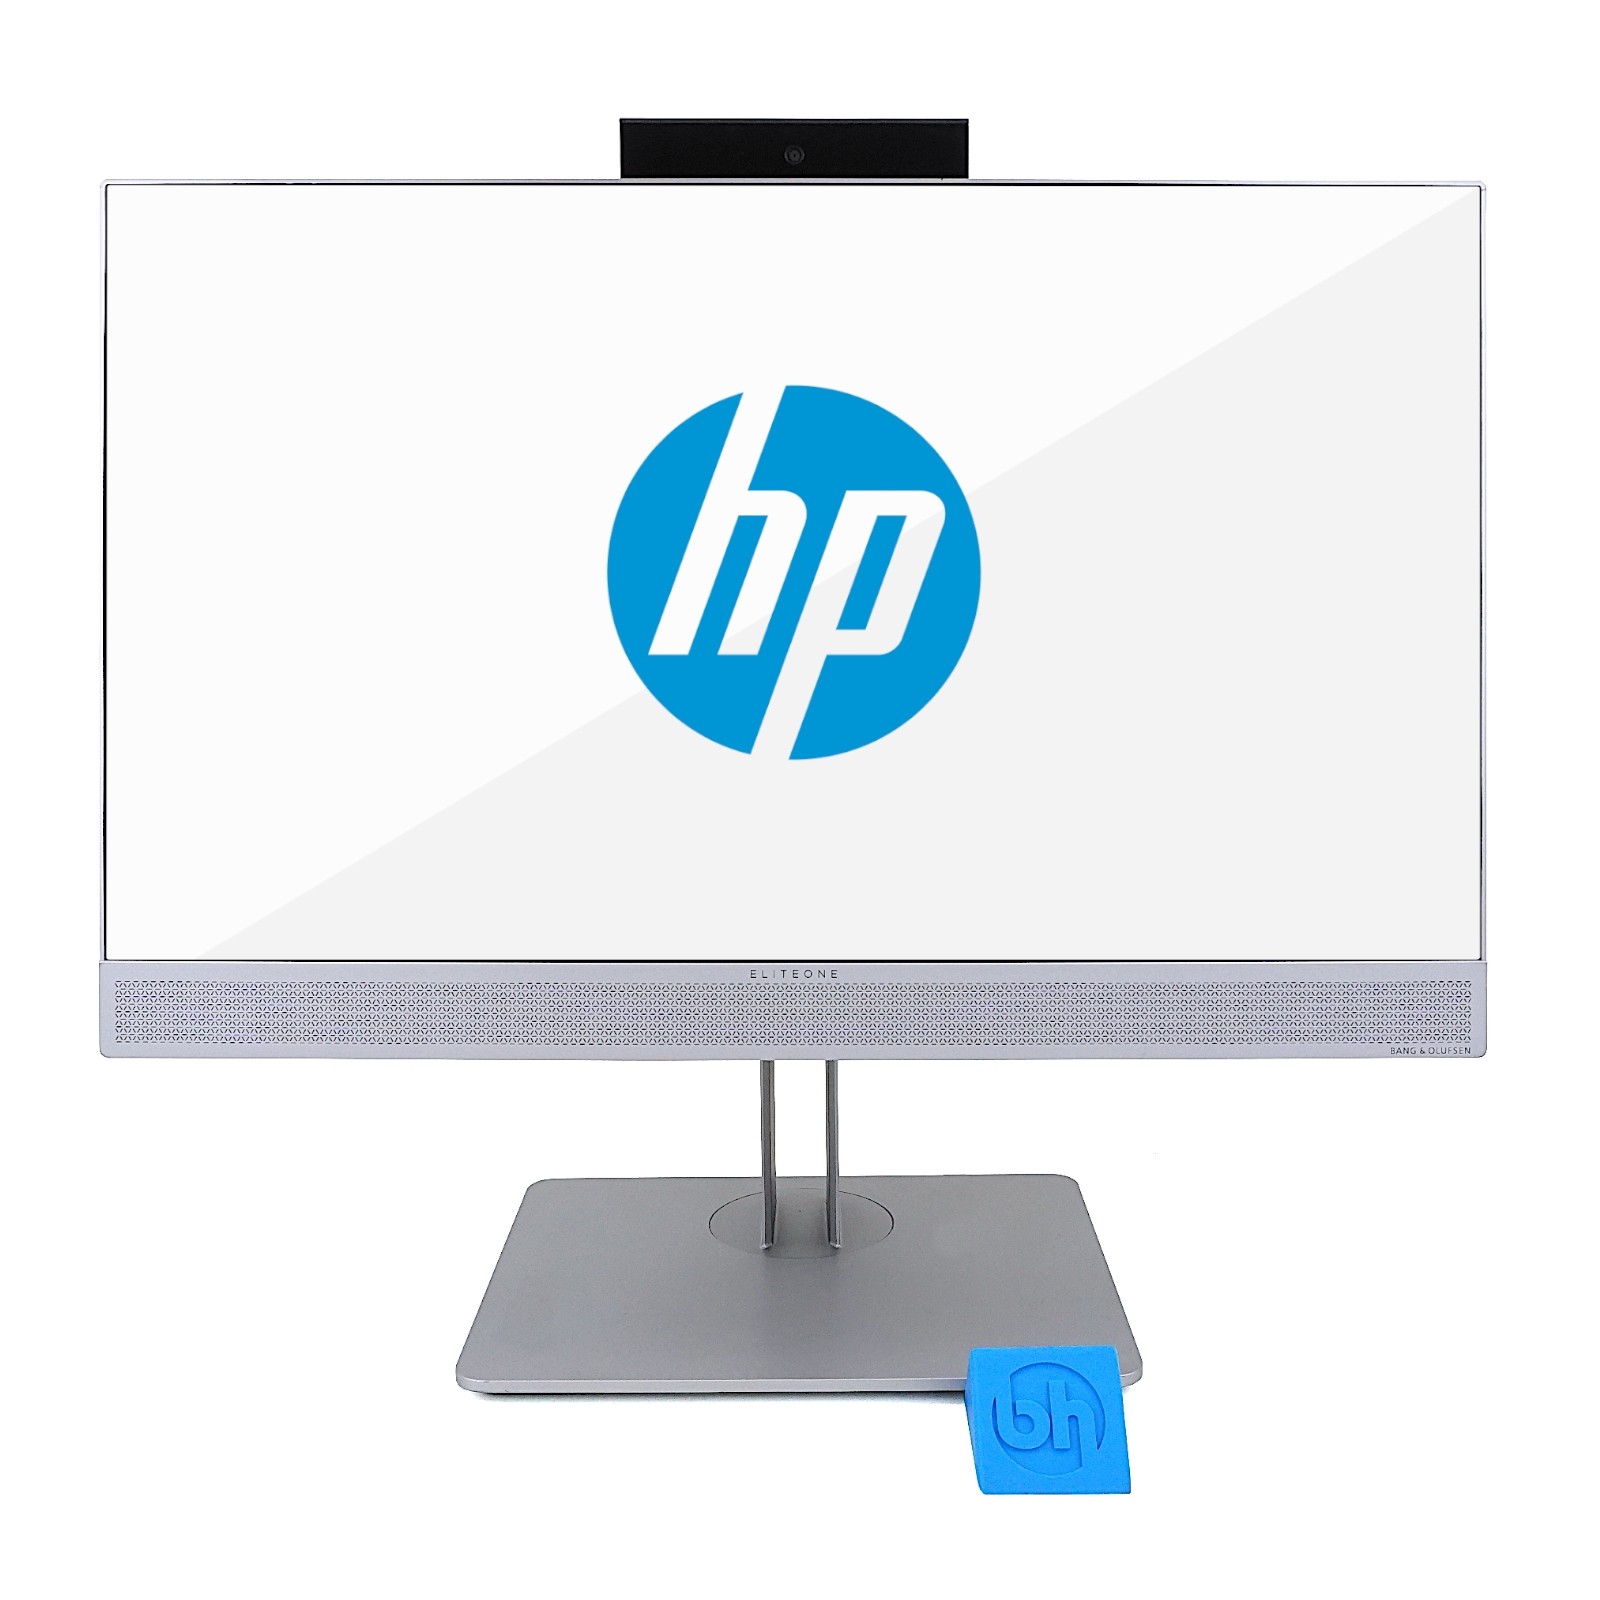 HP EliteOne 800 G3 23.8 Inch All-in-One AIO Desktop PC Front